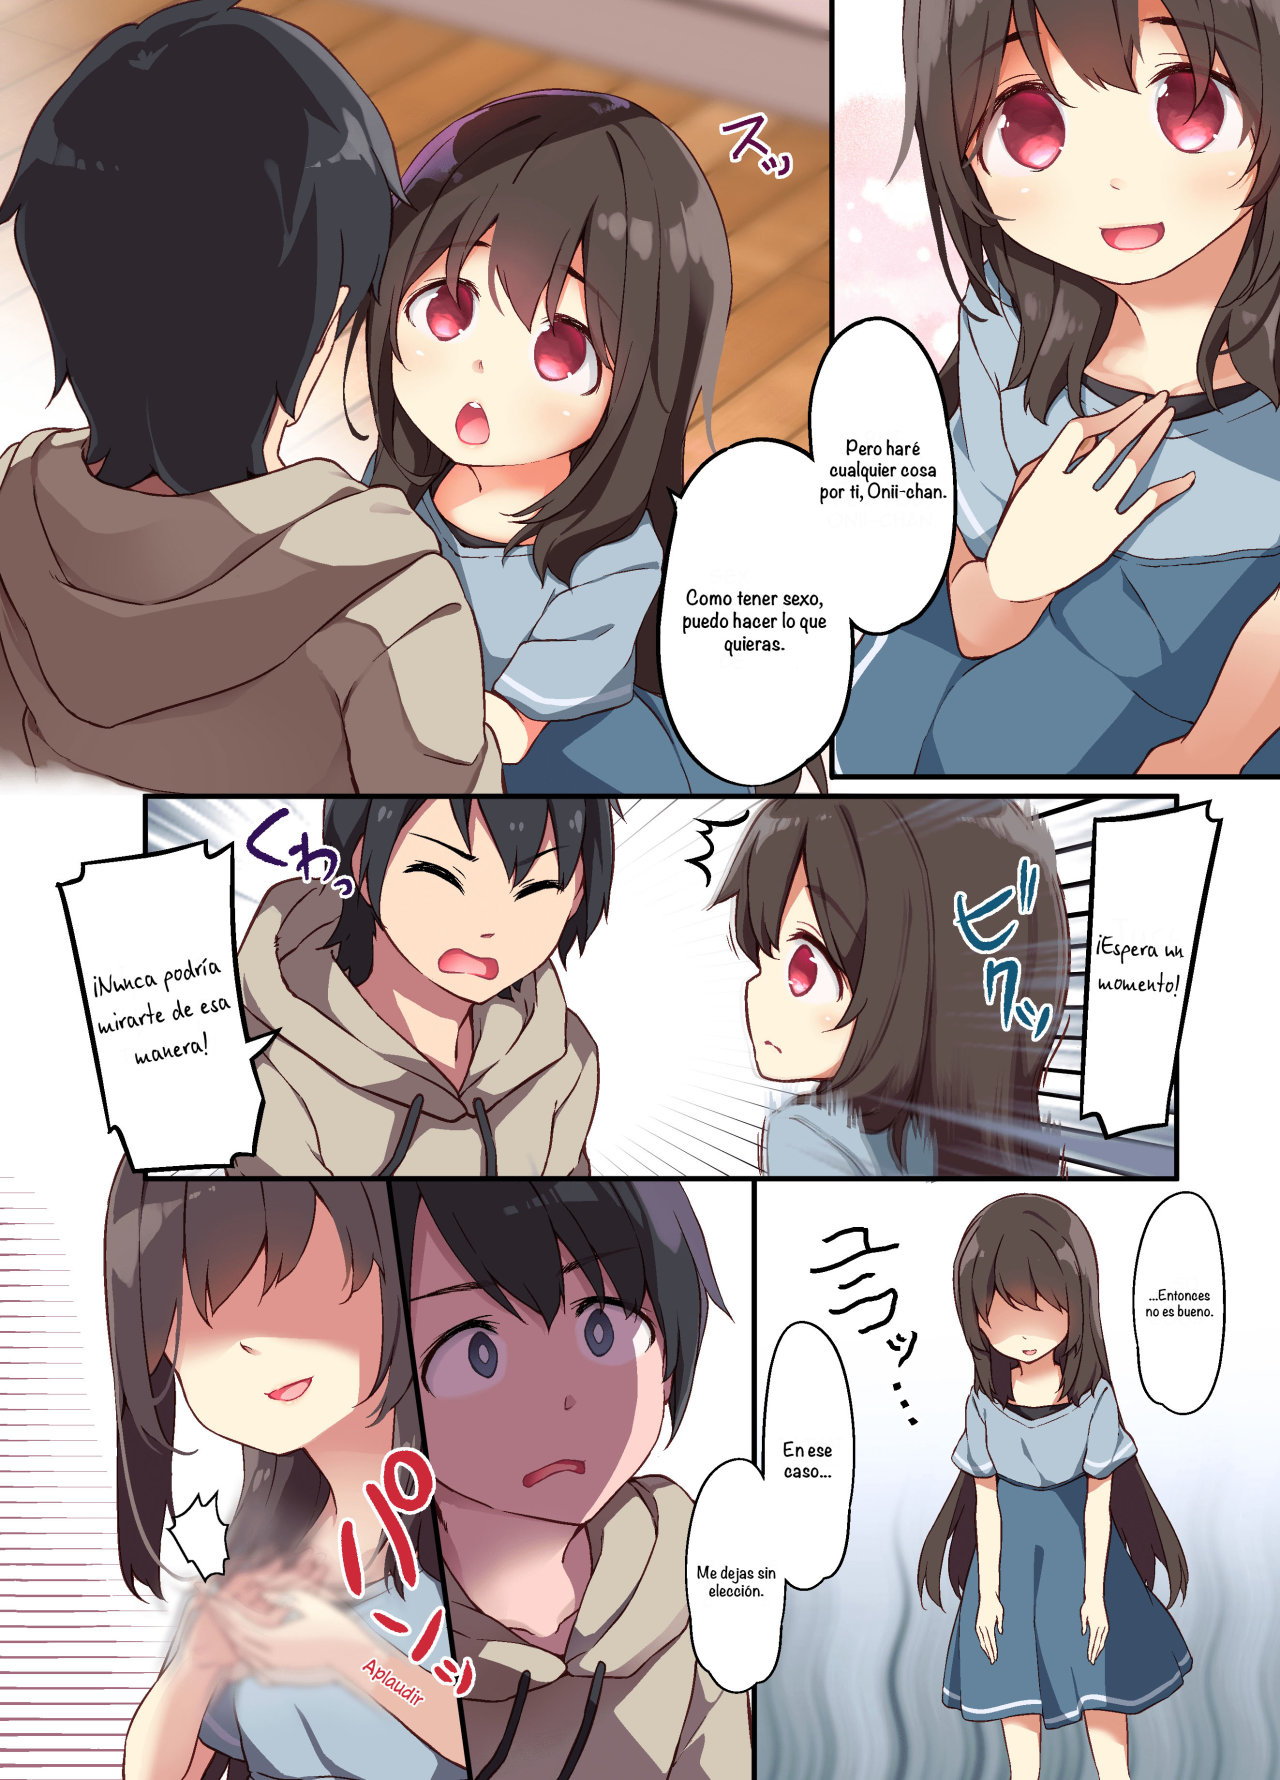 A Yandere Little Sister wants to be impregnated by her big brother - 8